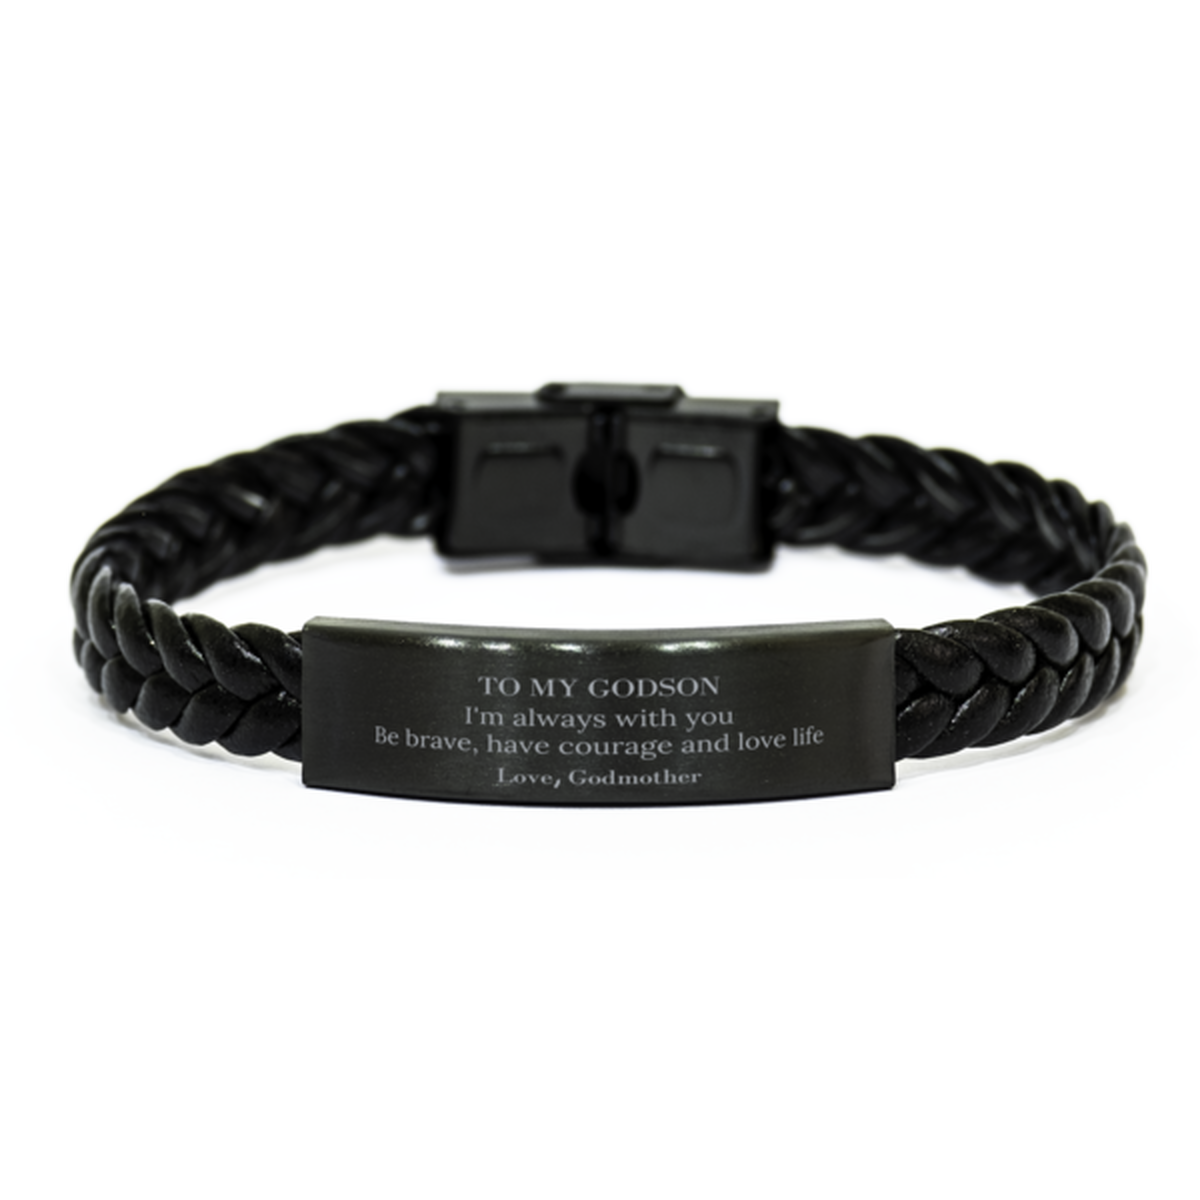 To My Godson Gifts from Godmother, Unique Braided Leather Bracelet Inspirational Christmas Birthday Graduation Gifts for Godson I'm always with you. Be brave, have courage and love life. Love, Godmother